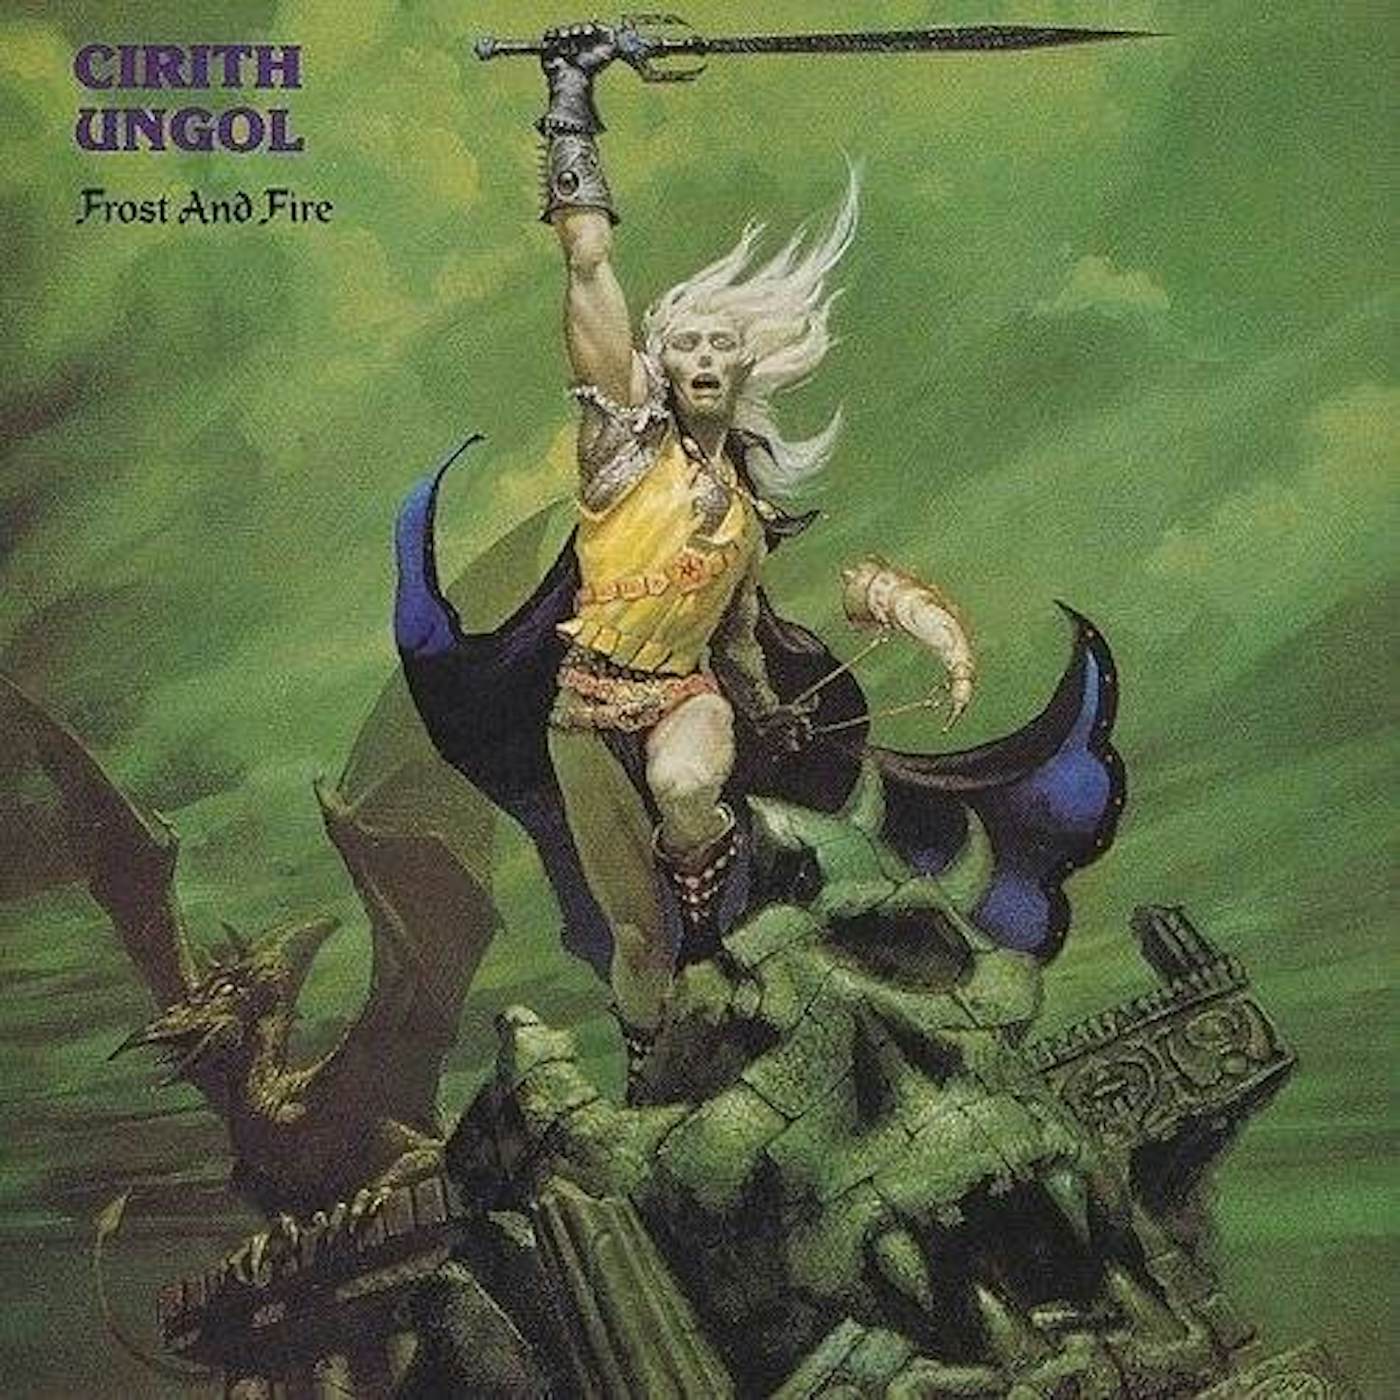 Cirith Ungol Frost and Fire Vinyl Record